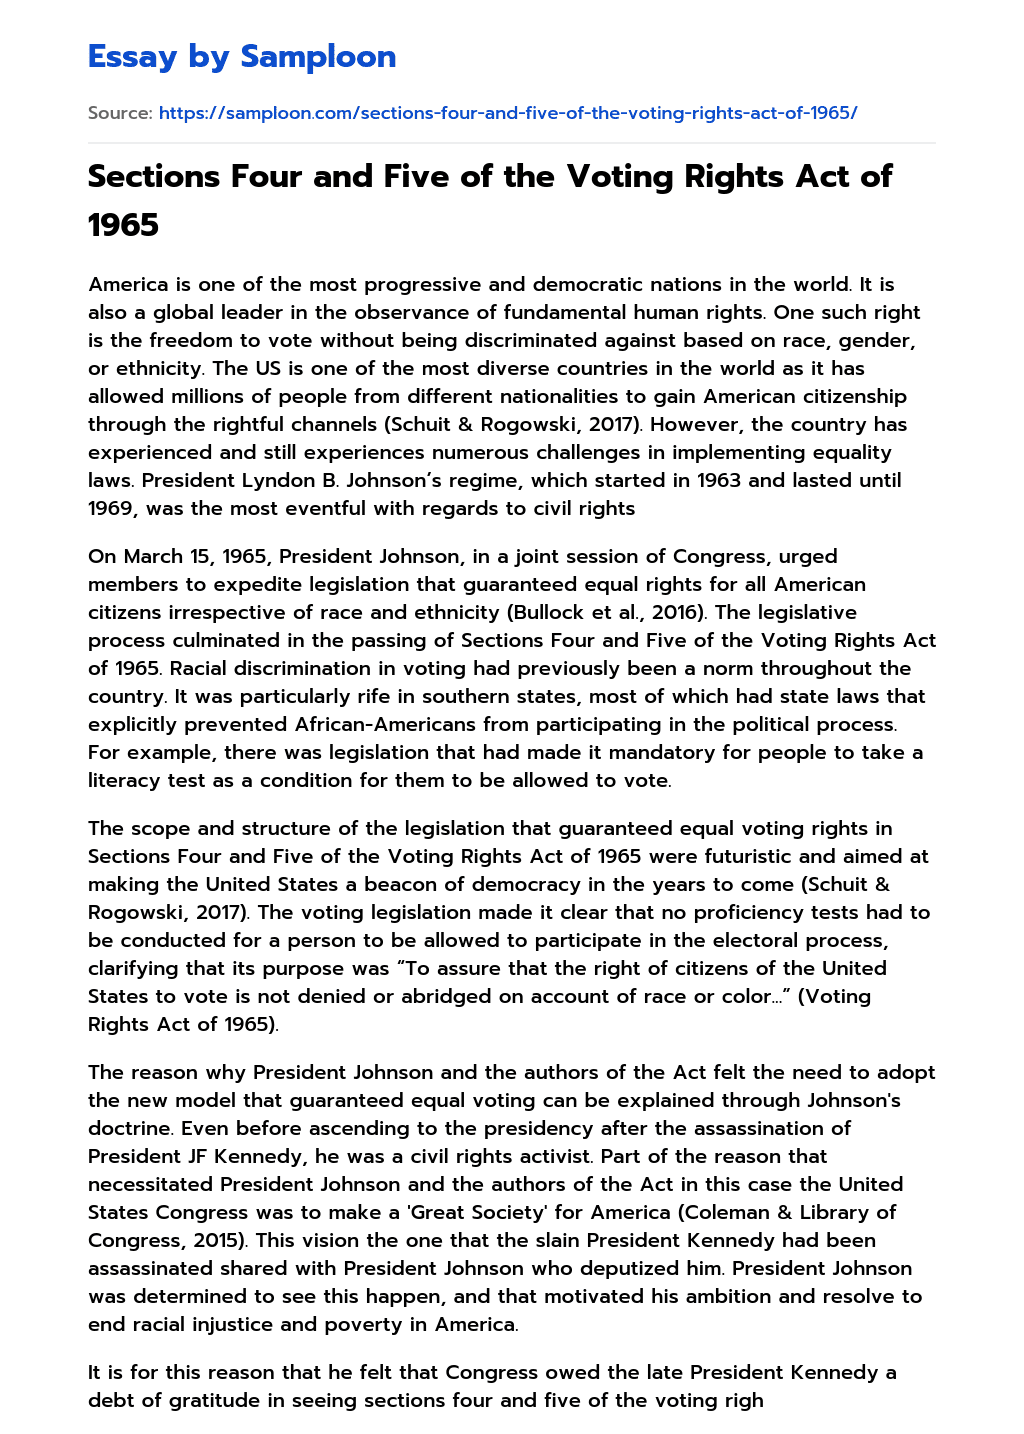 Sections Four and Five of the Voting Rights Act of 1965 essay